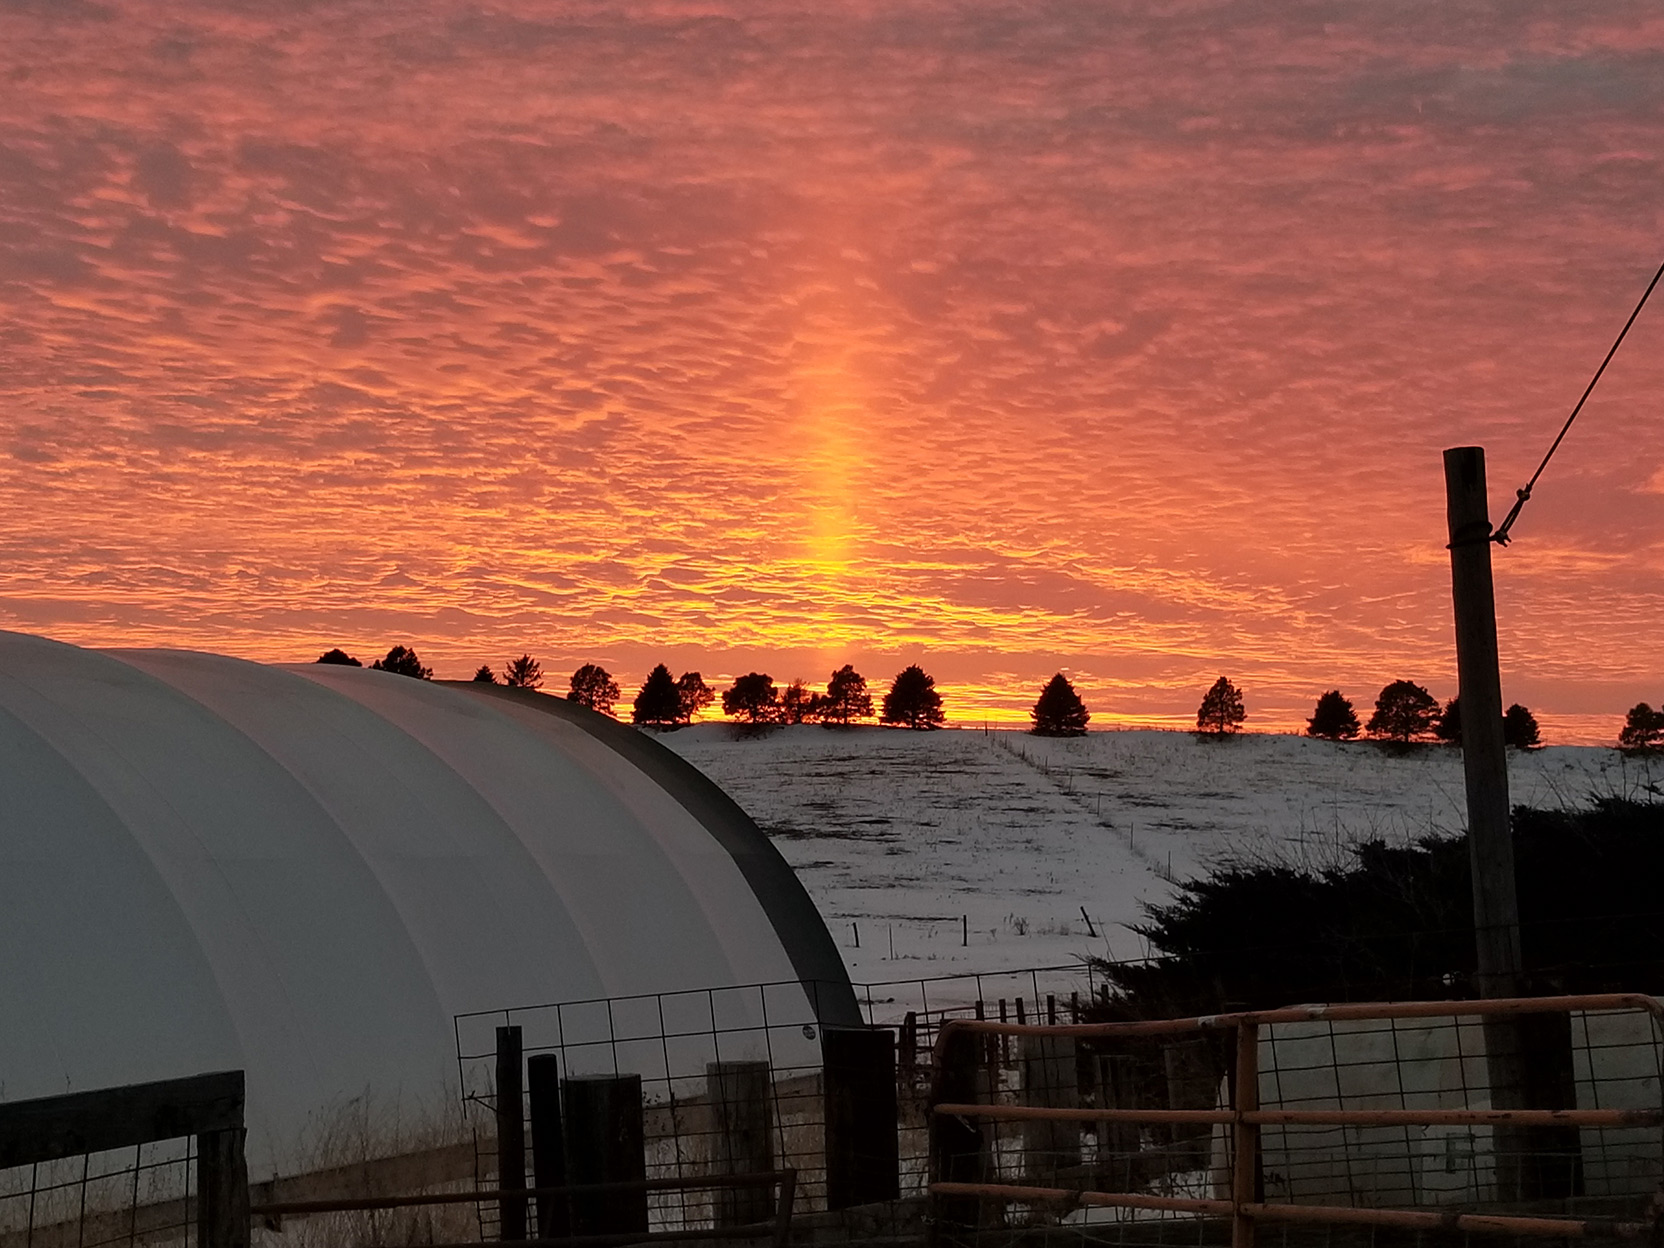 A hoop barn in a snow covered field with a sunset in the background